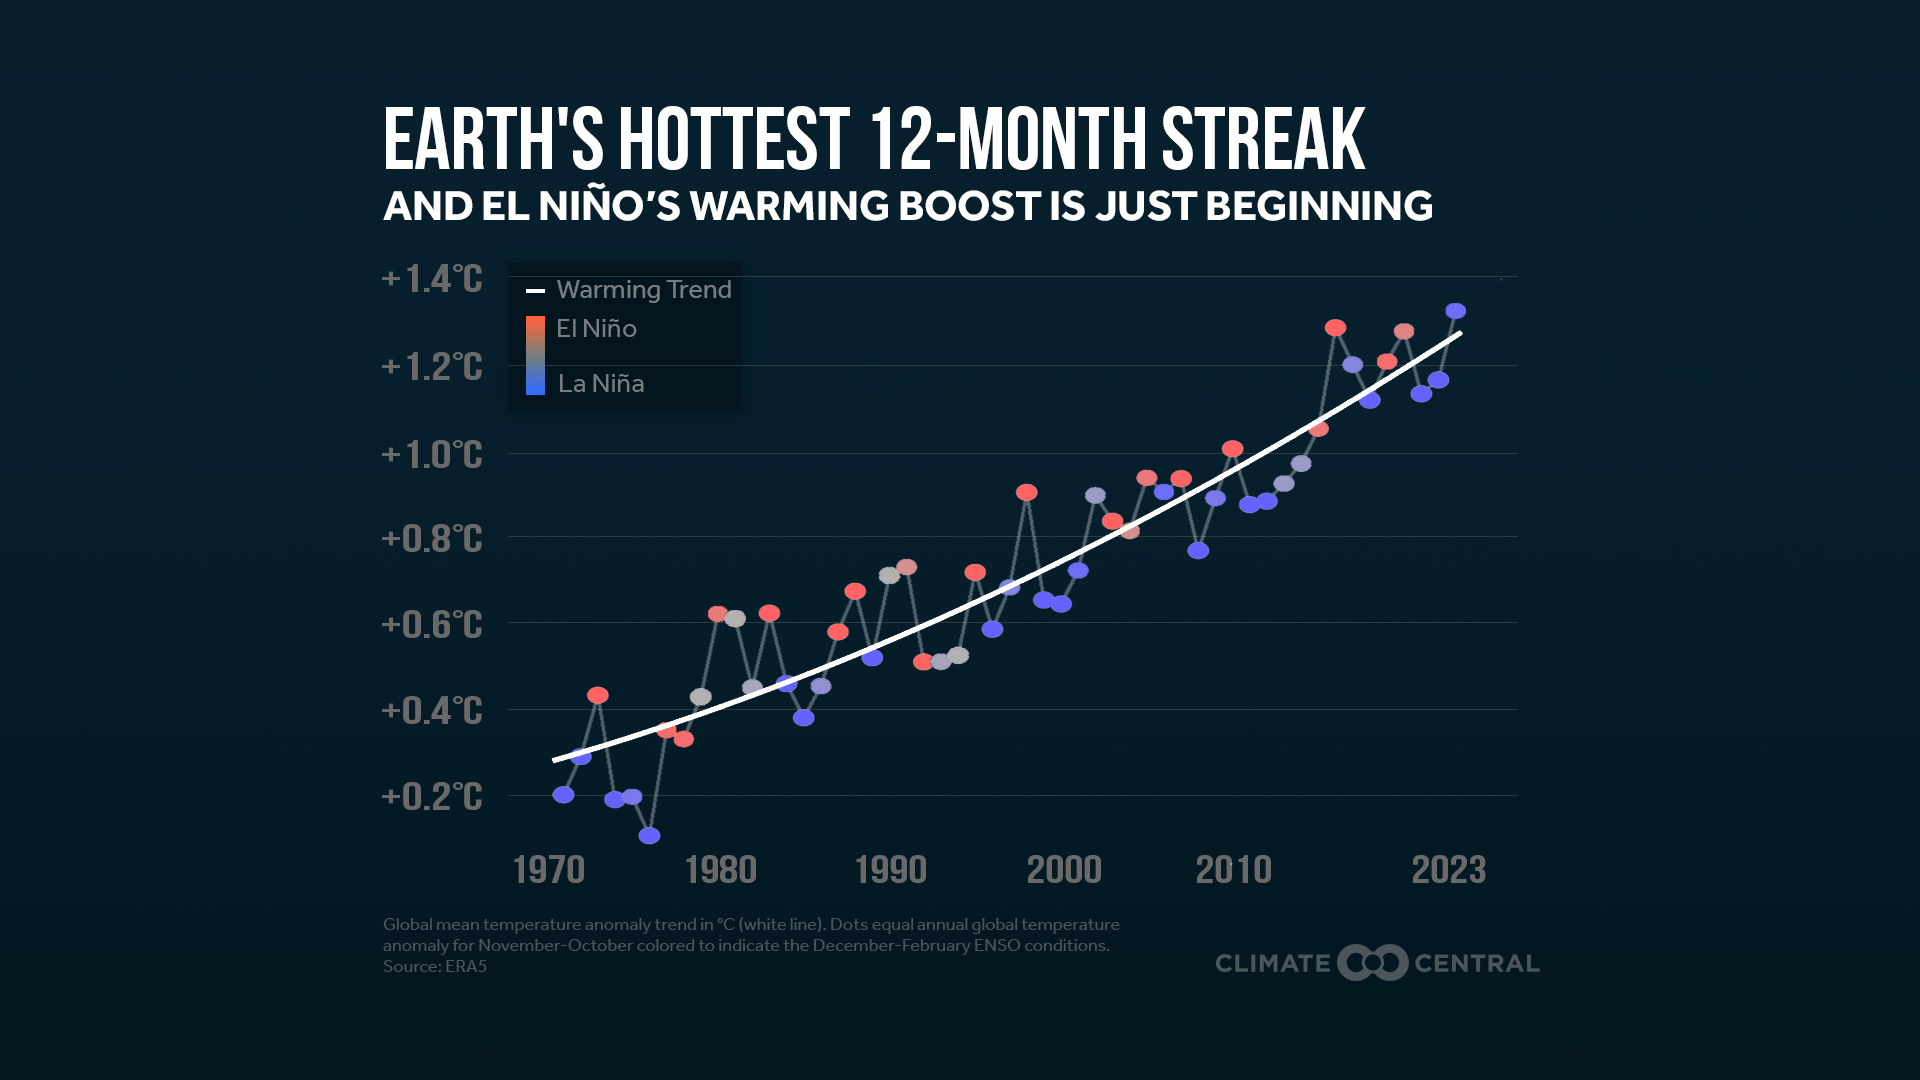 Graph showing global average temperature rise over the past 50 years